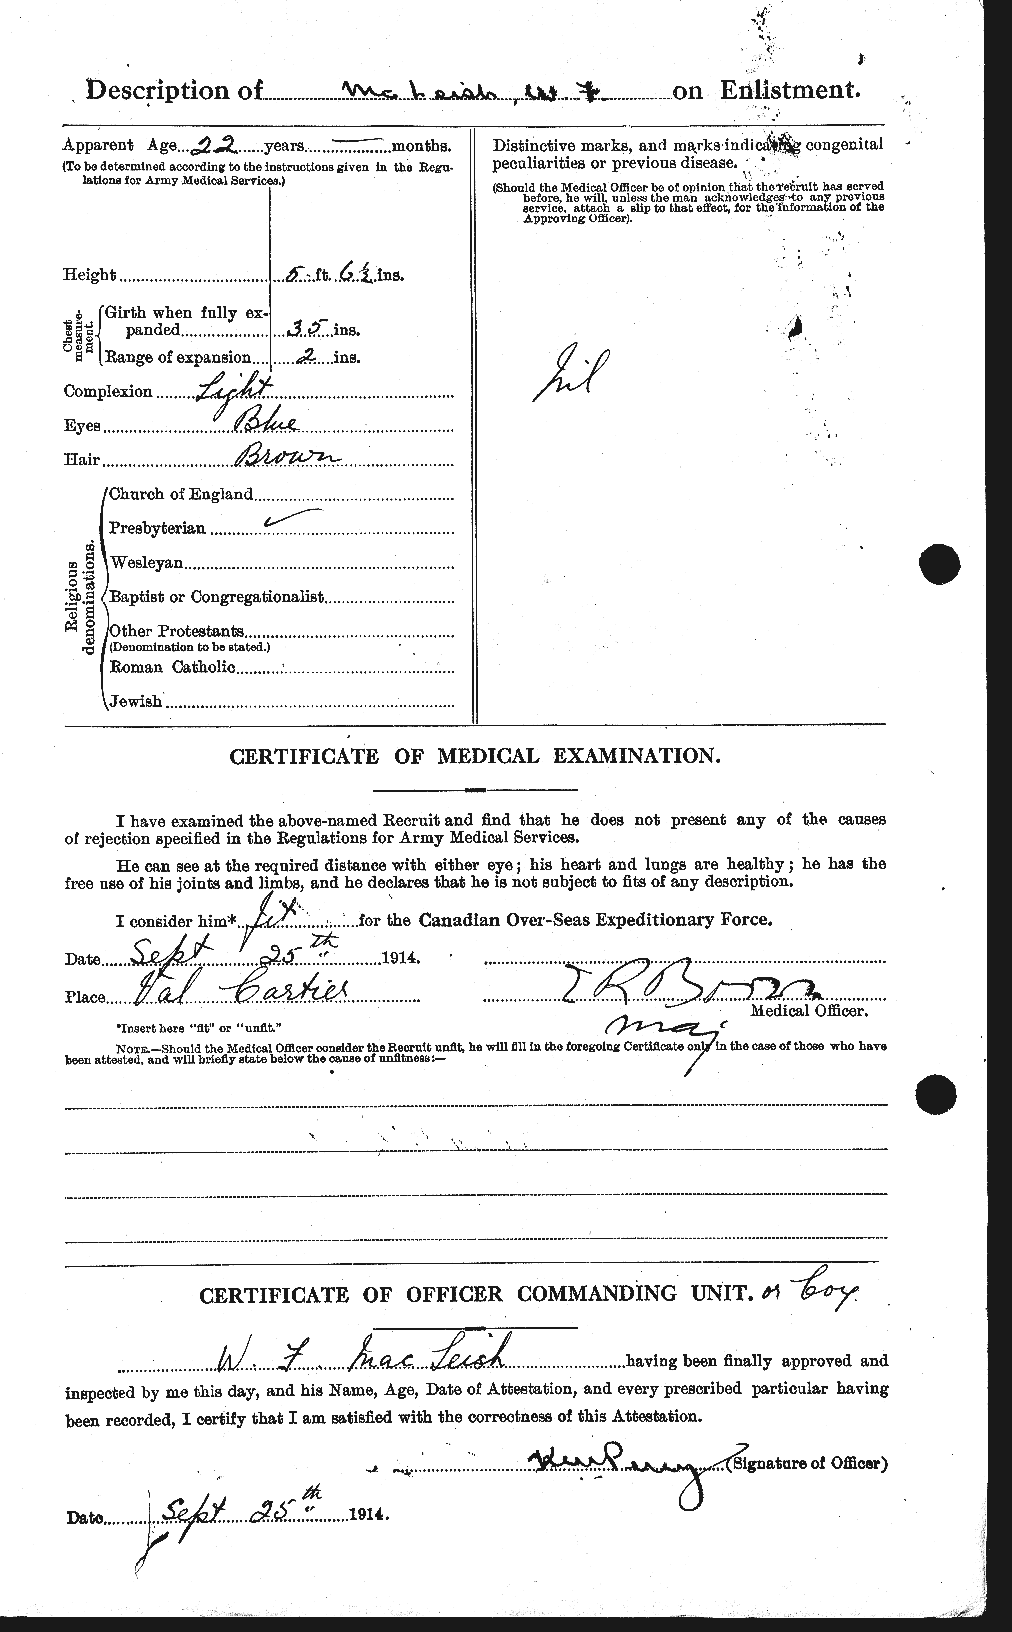 Personnel Records of the First World War - CEF 535348b